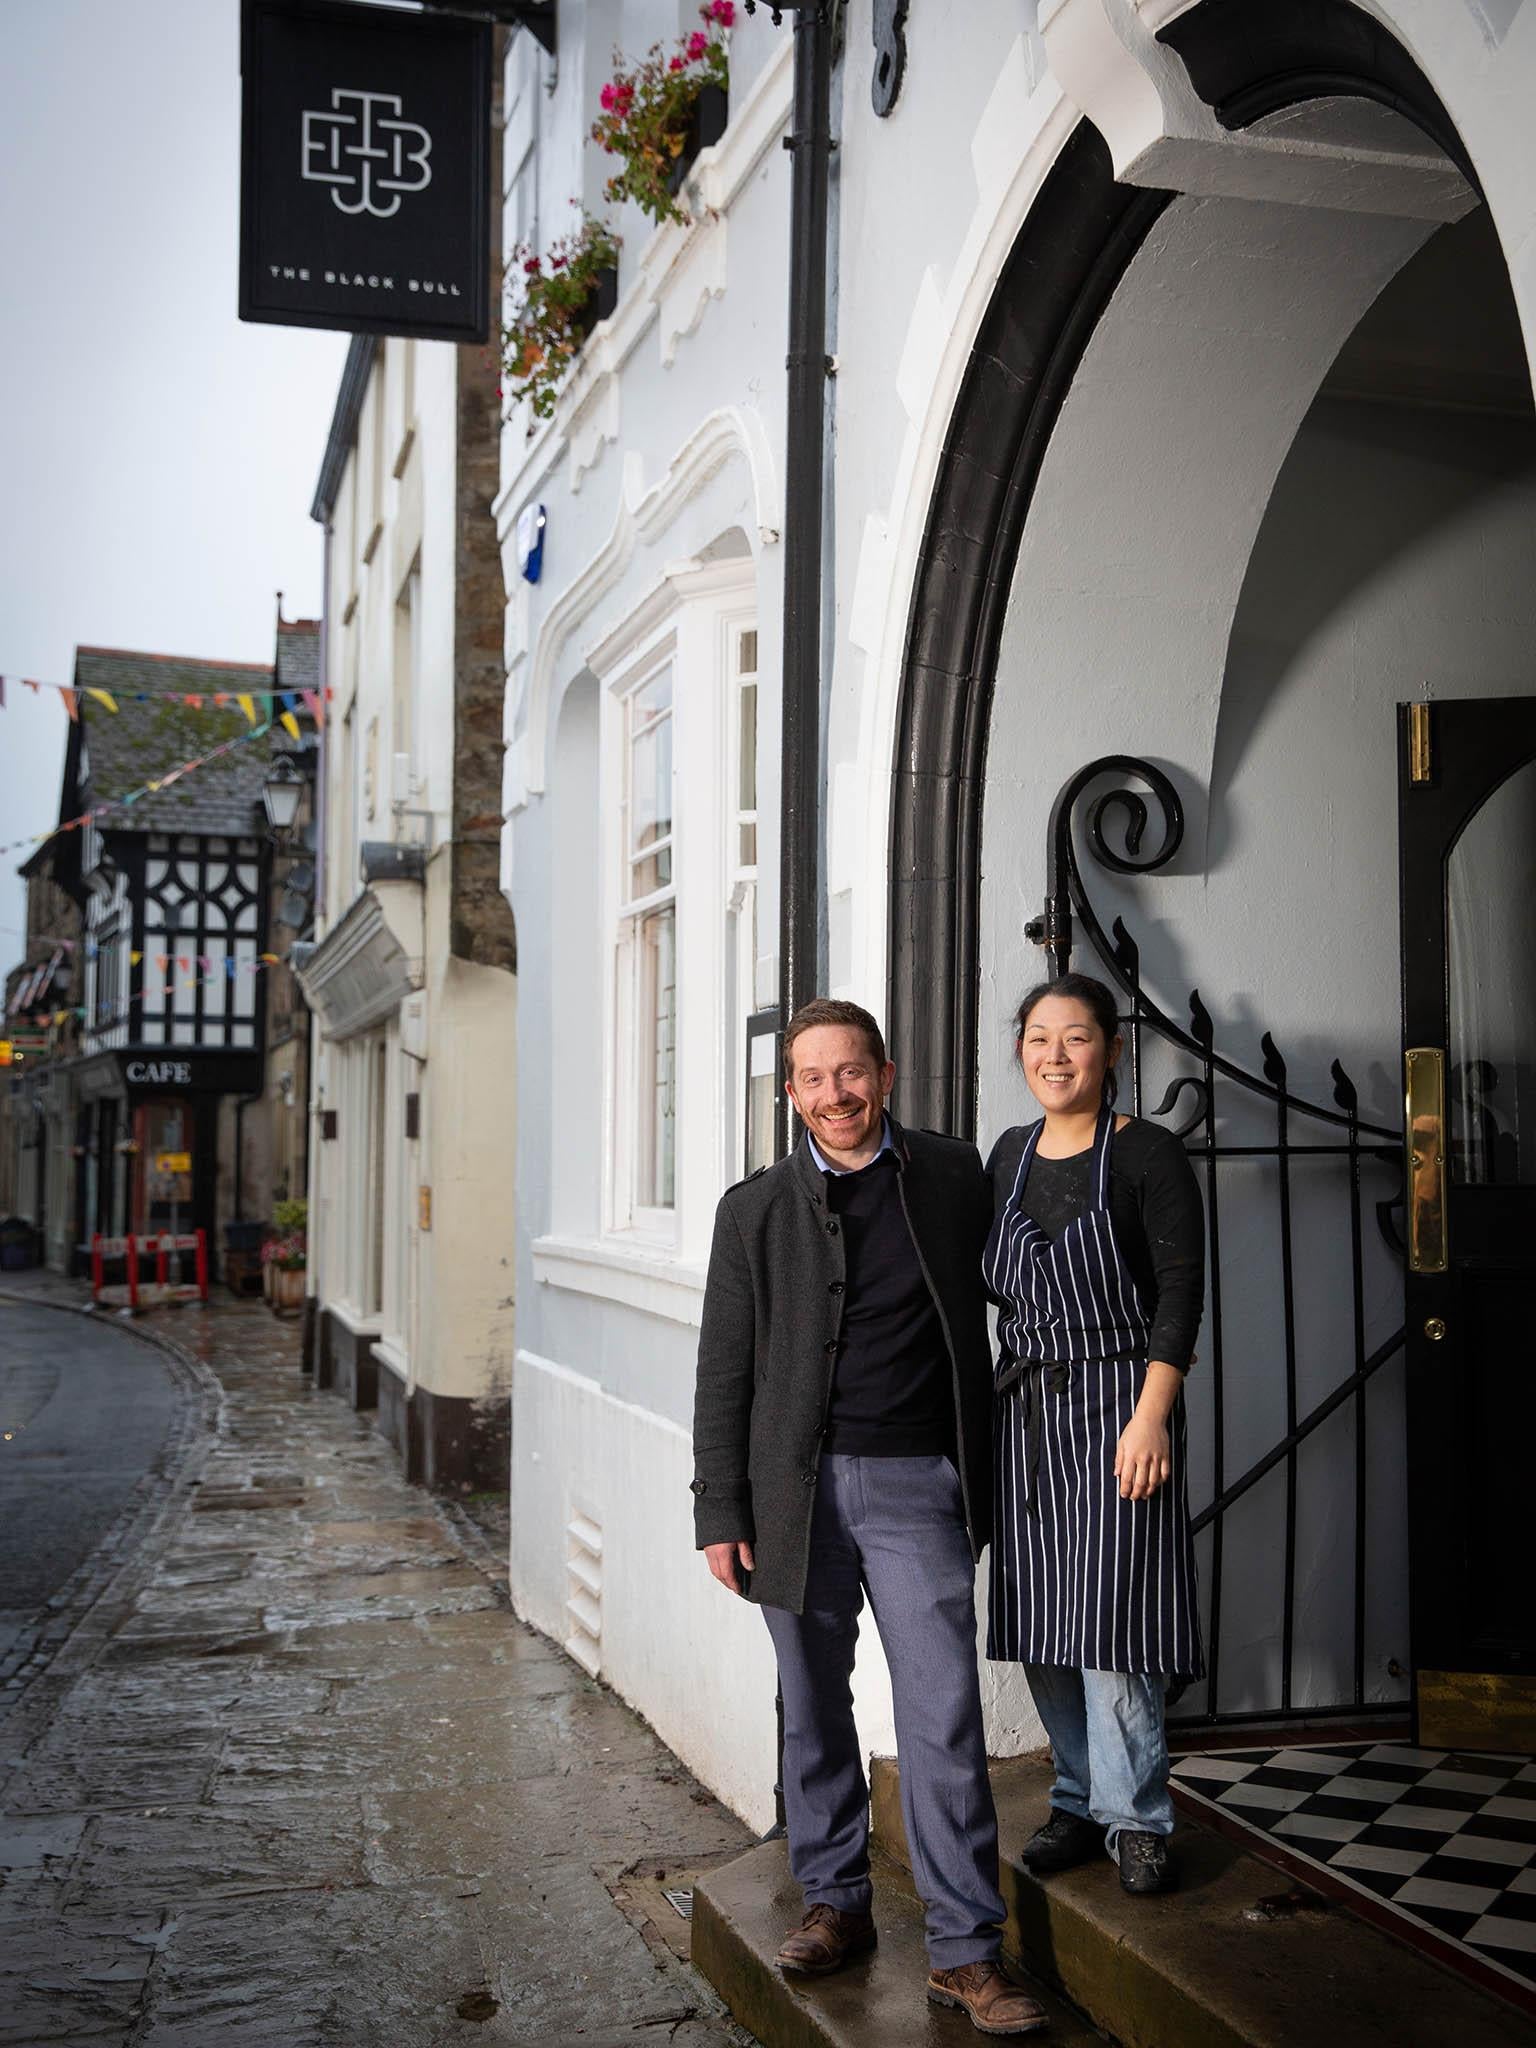 Nina and James Ratcliff reopened the pub in July after a full renovation following serious flooding (Rob Withrow)